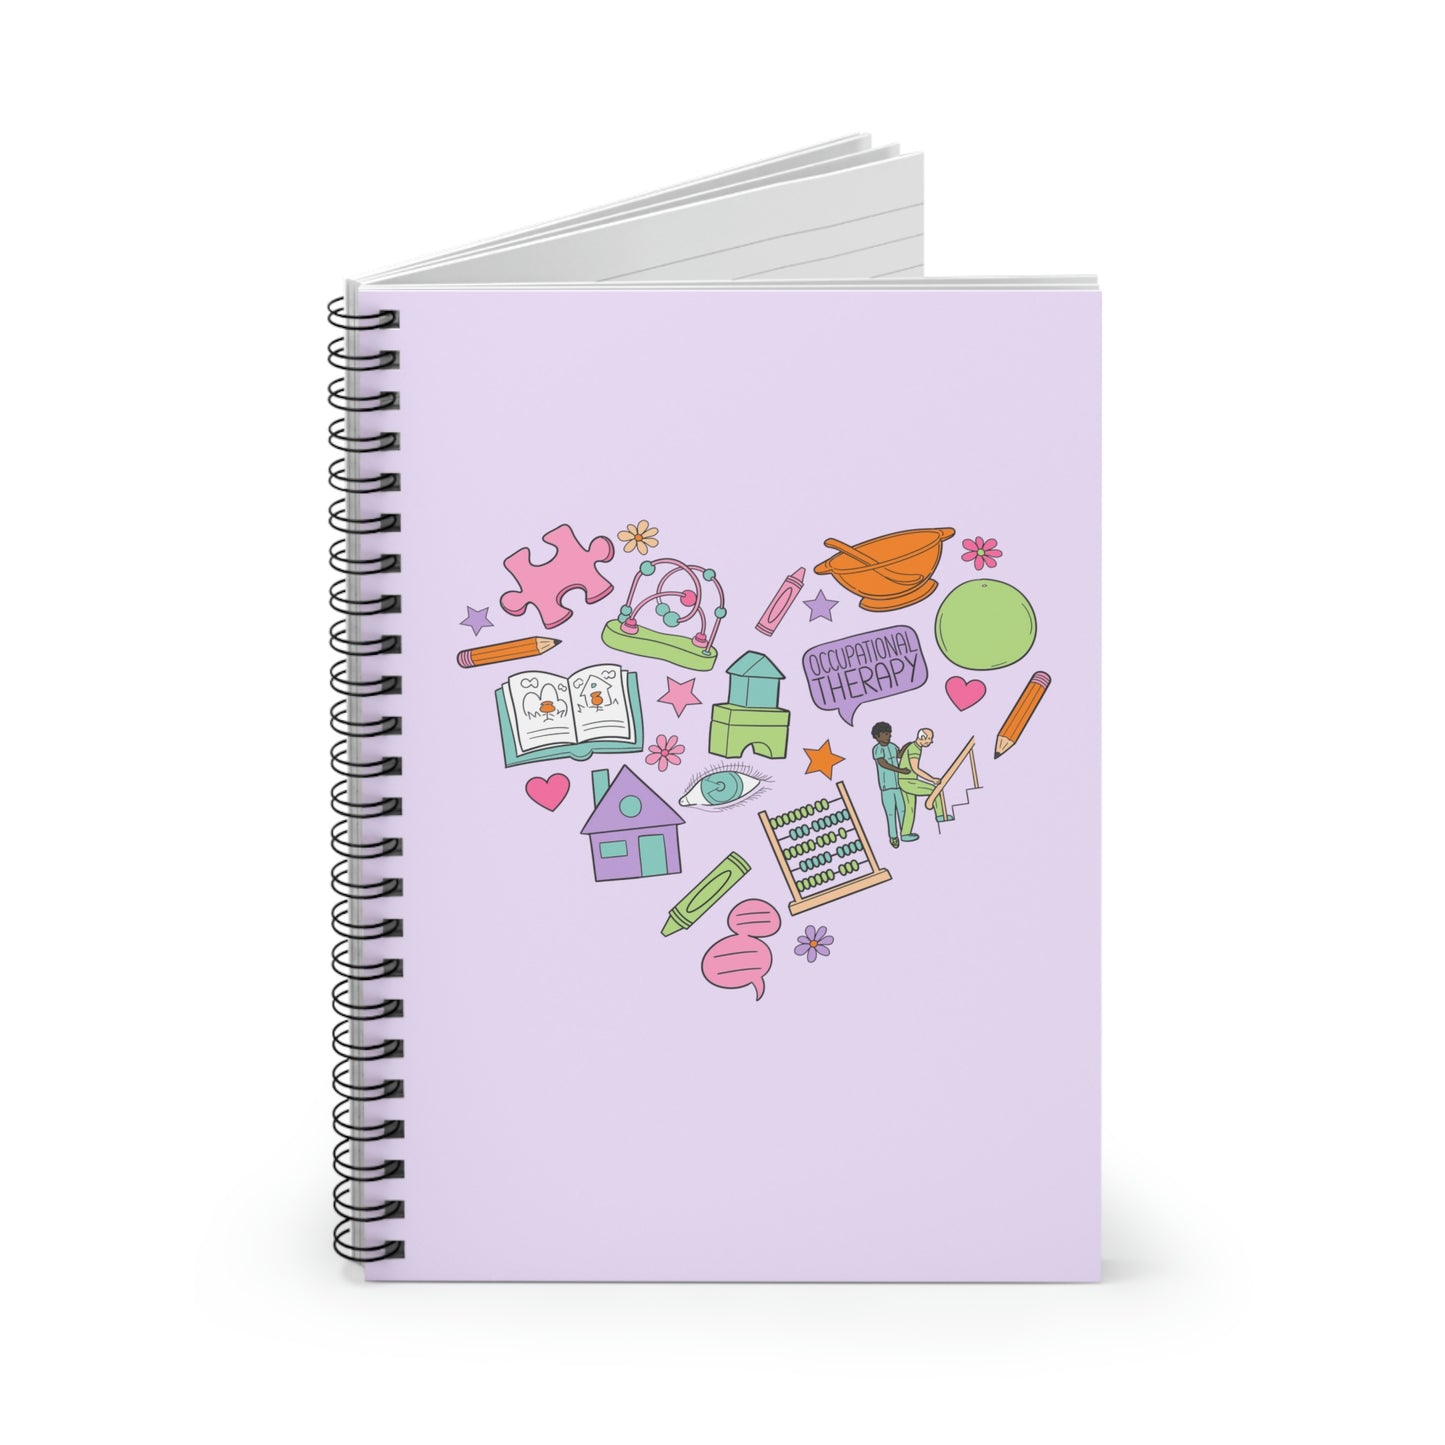 Occupational Therapy Essentials Spiral Ruled Line Notebook